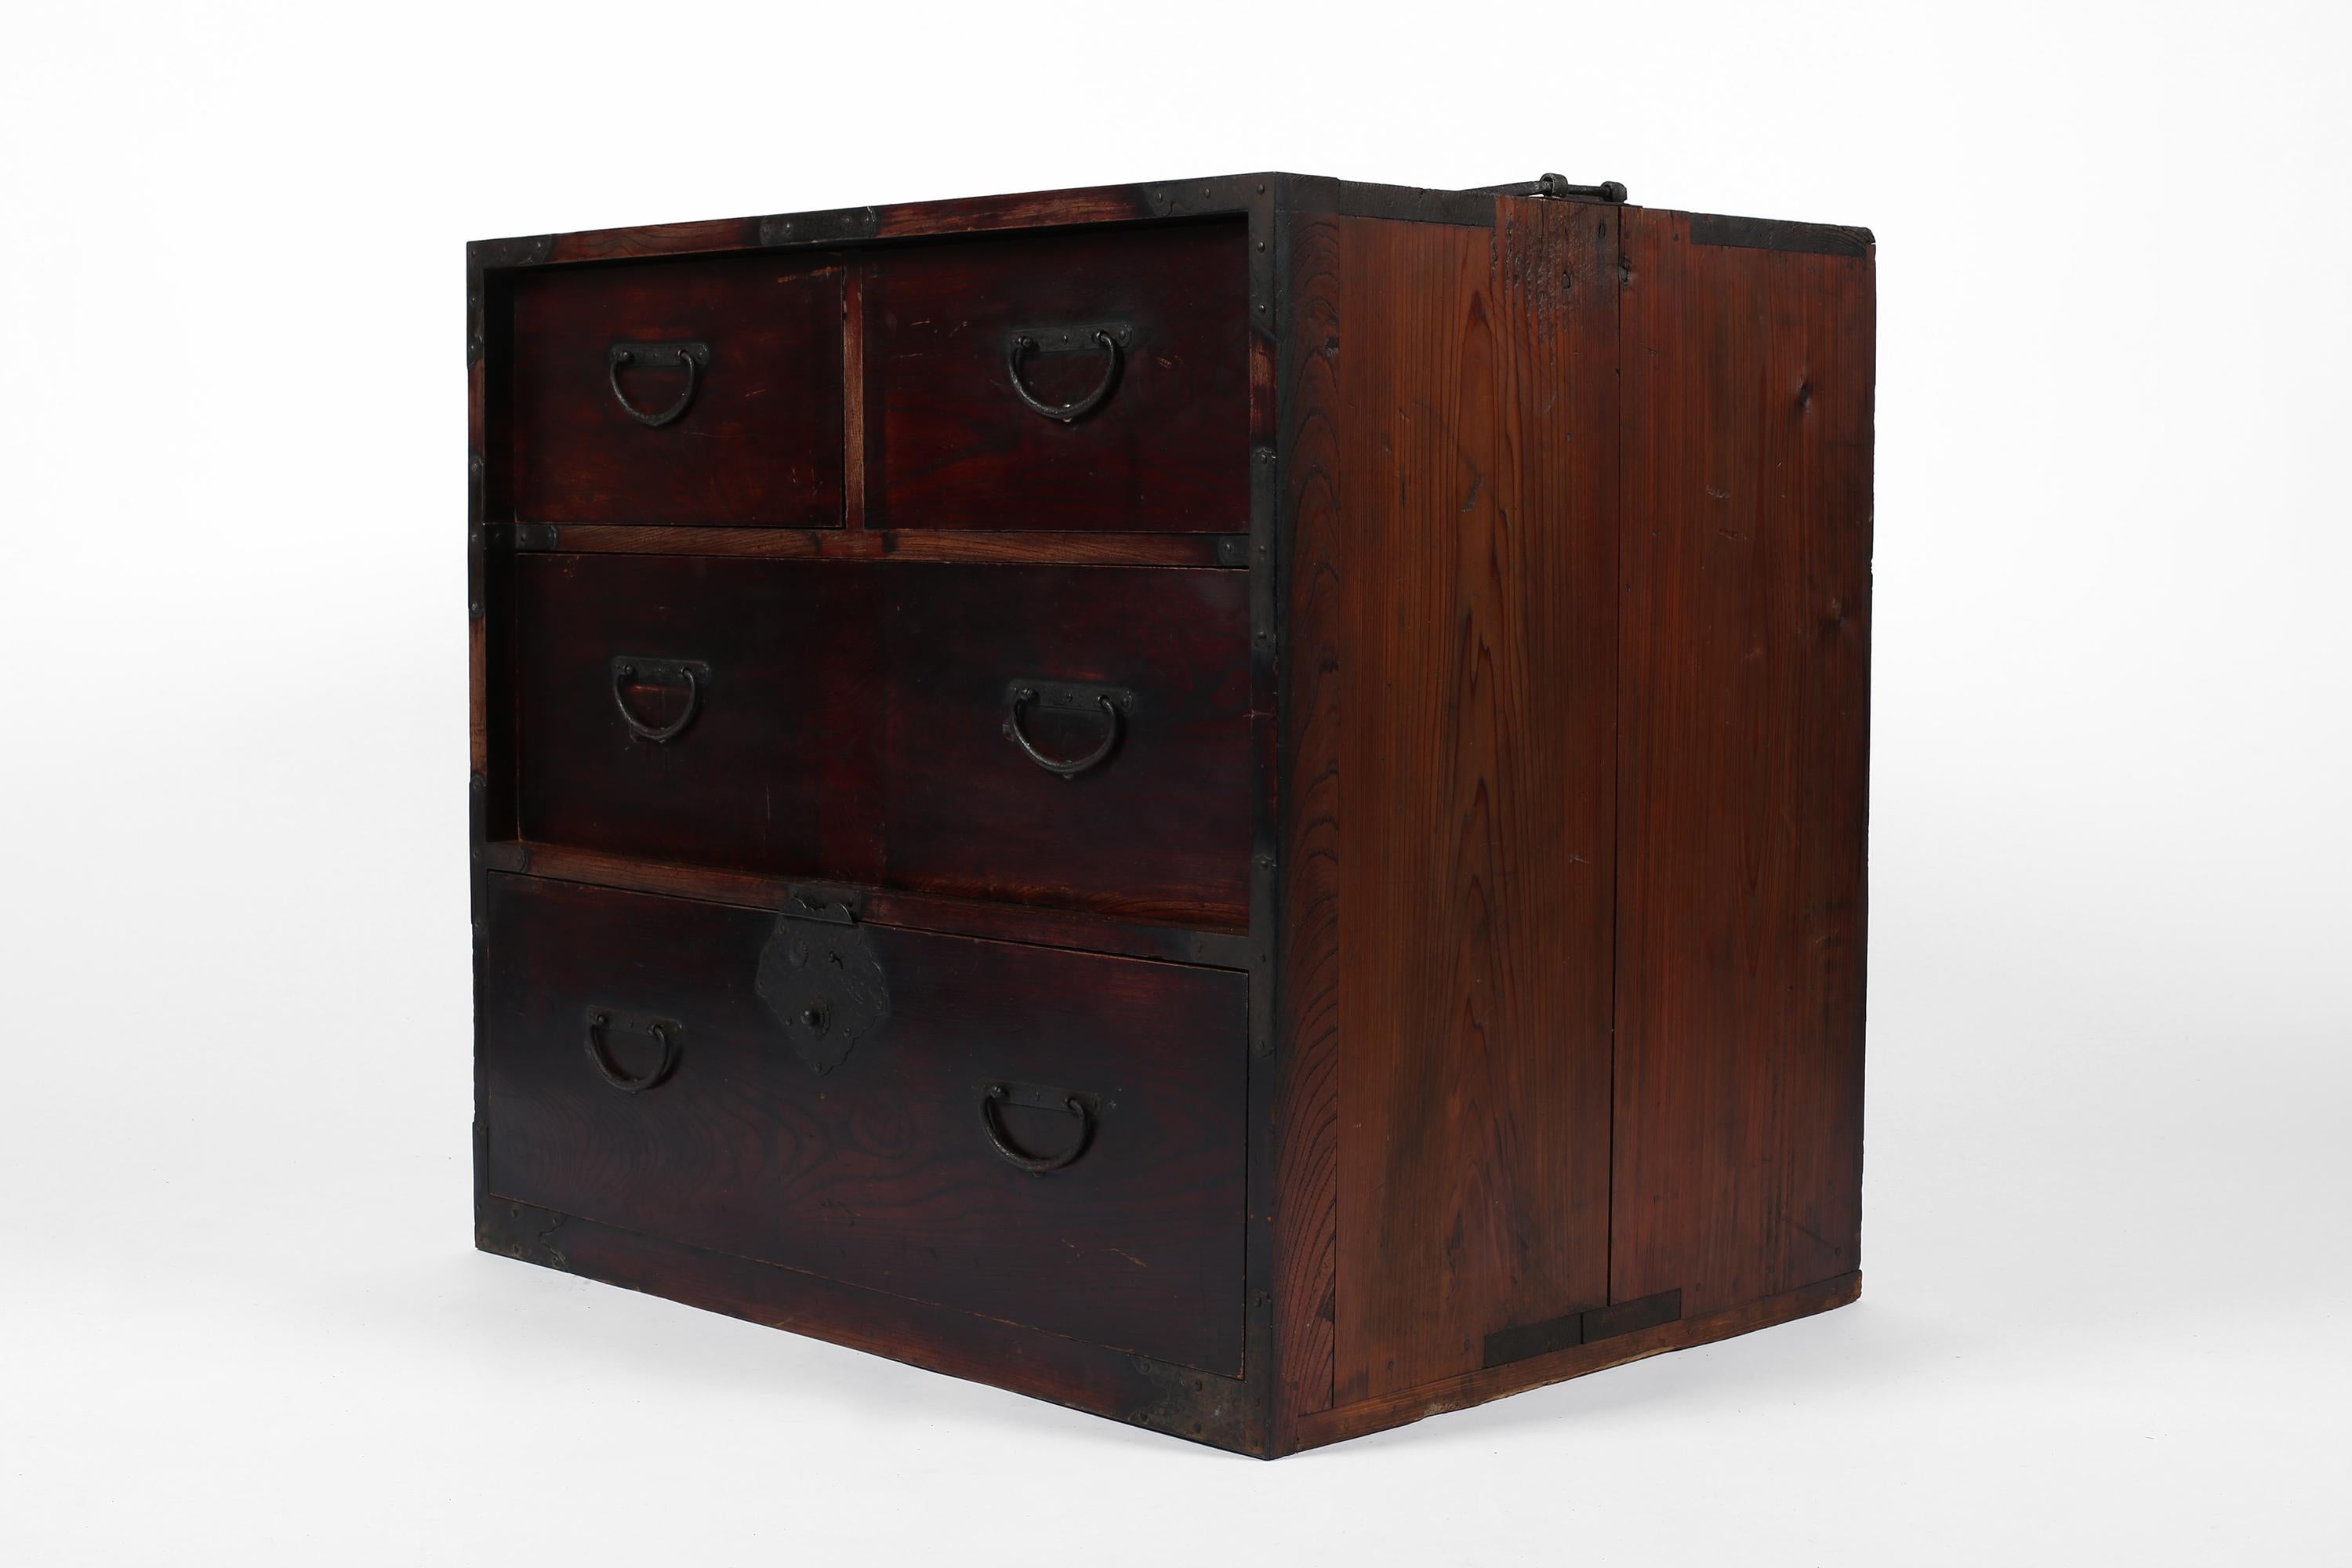 An unusually deep & heavy Meiji period tansu chest constructed from patinated stained elm timber with forged iron hardware. Two small hidden drawers to the top right can be removed to reveal a further two secret compartments within. Original locking